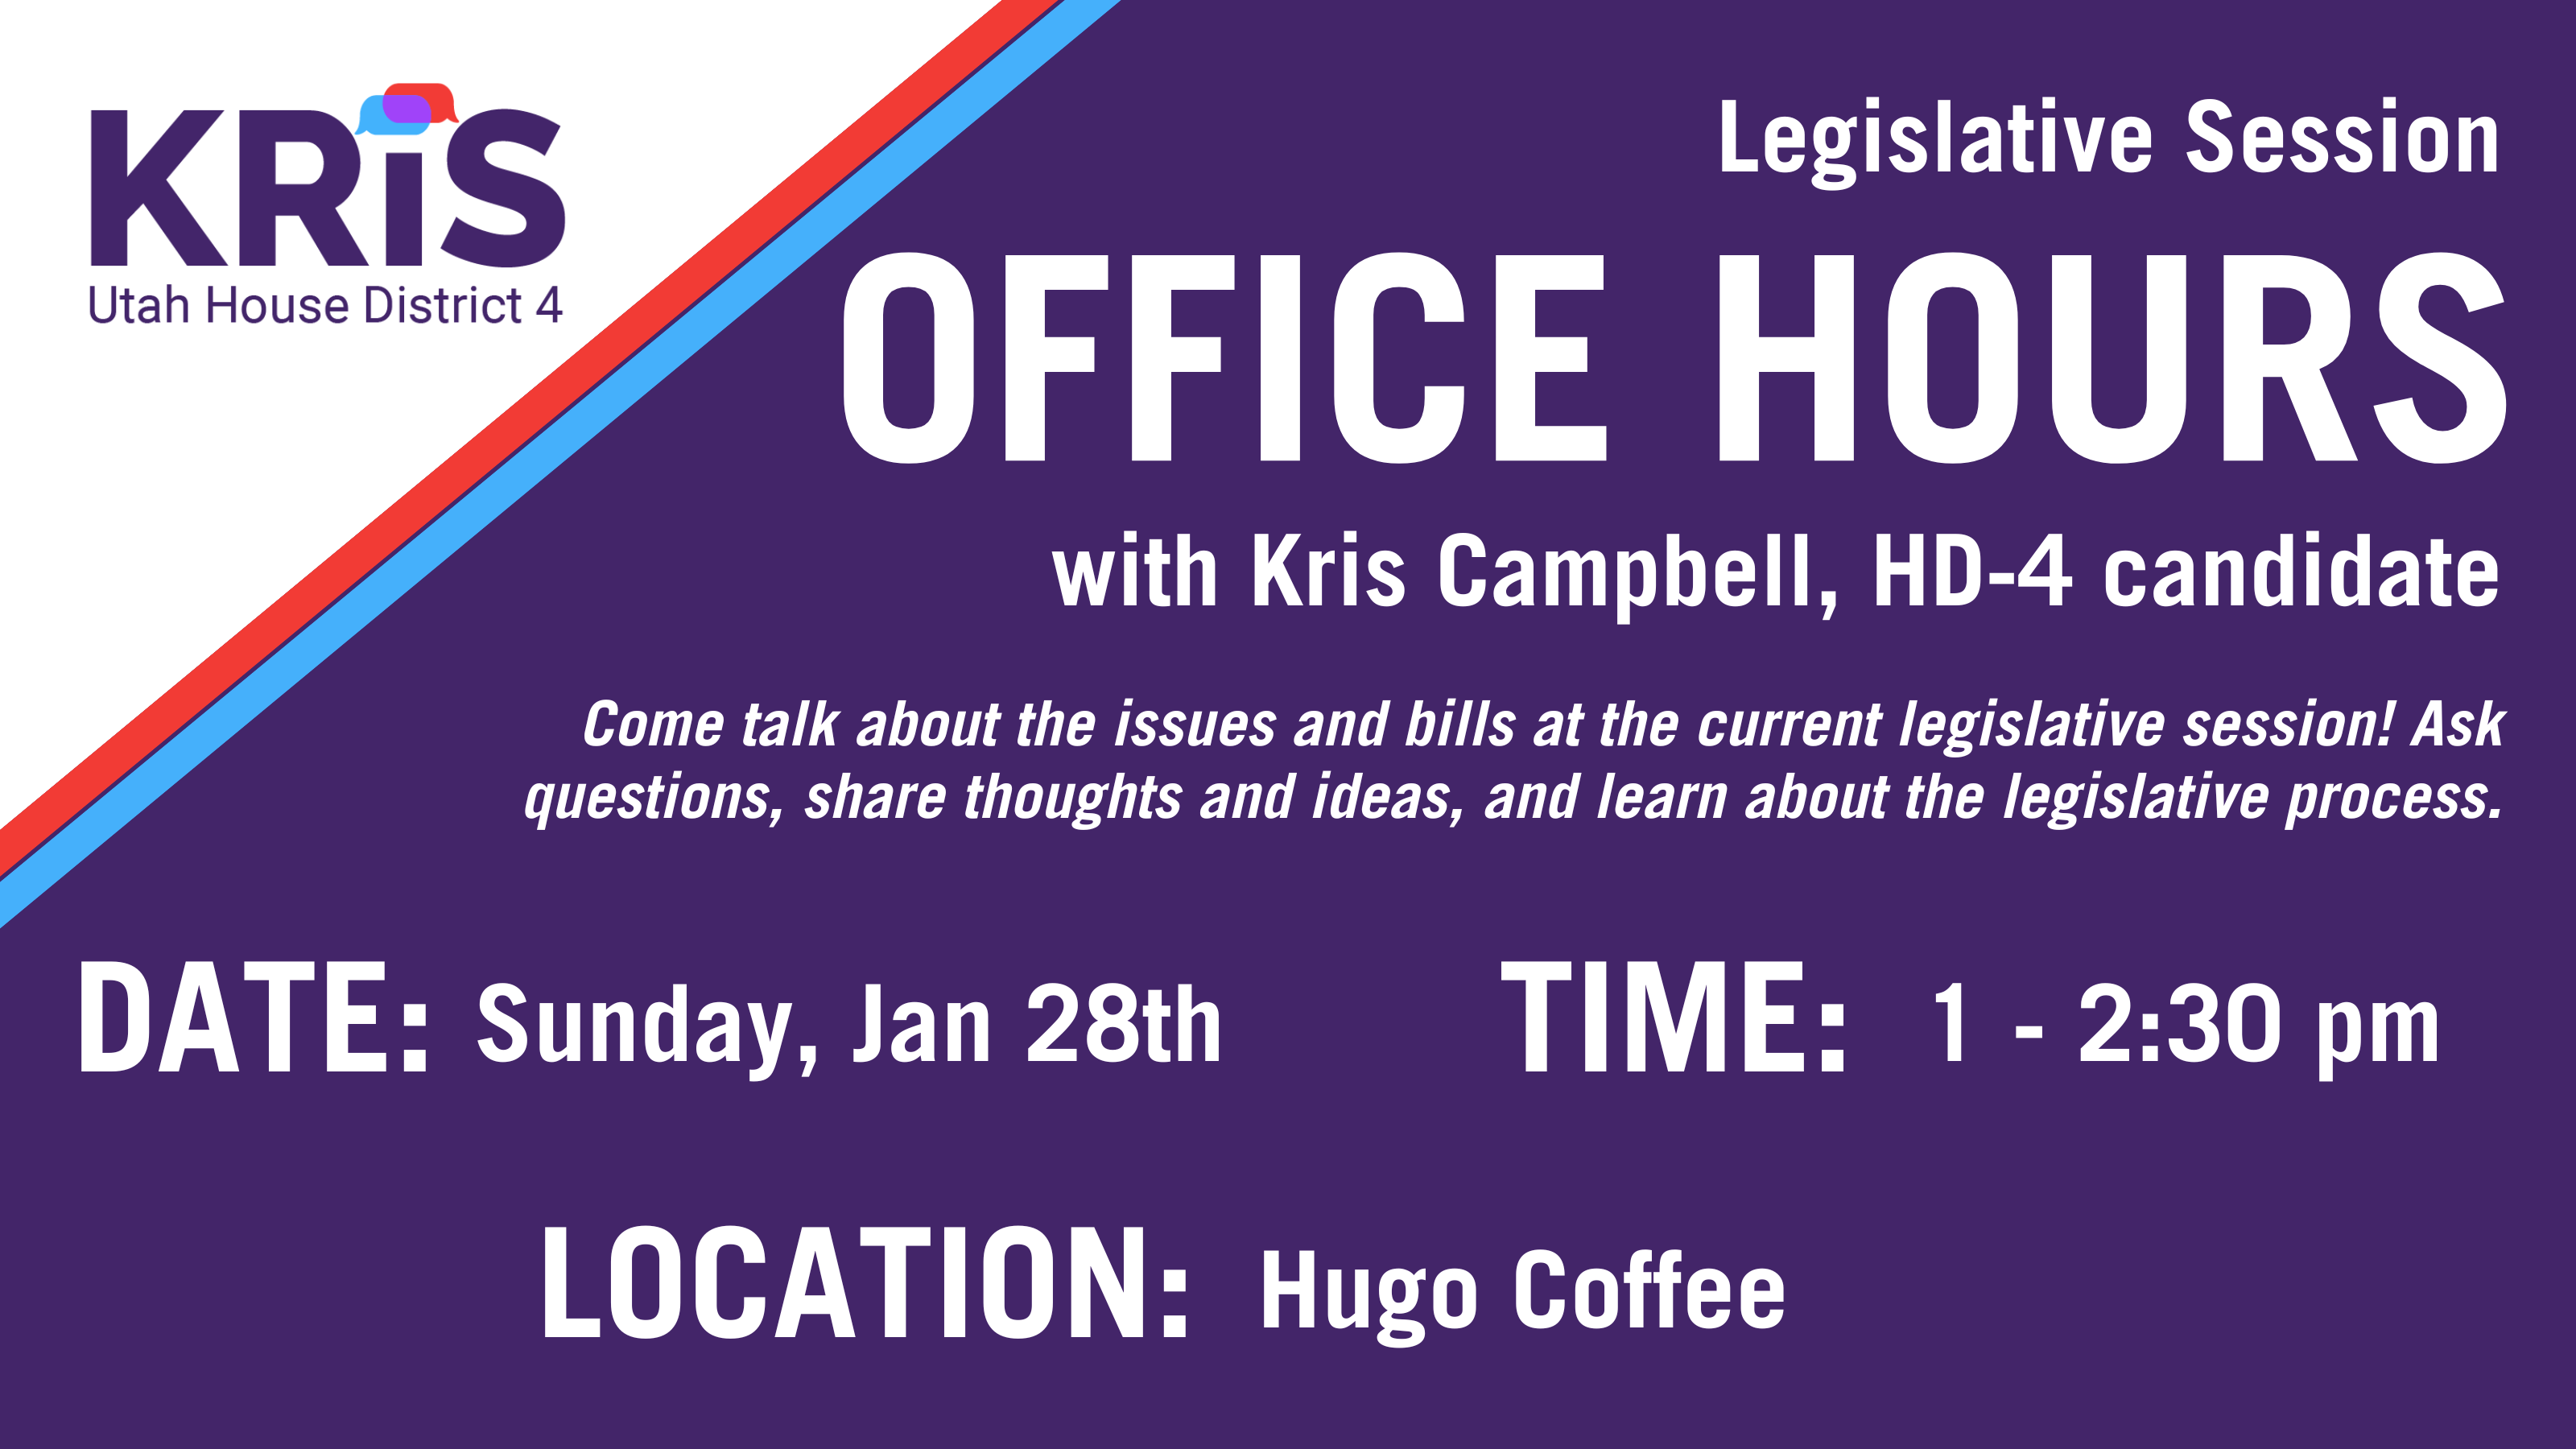 Legislative Session Office Hours with Kris Campbell, HD 4 Candidate. Sunday, Jan 28th from 1-2:30 pm at Hugo Coffee in Kimball Junction